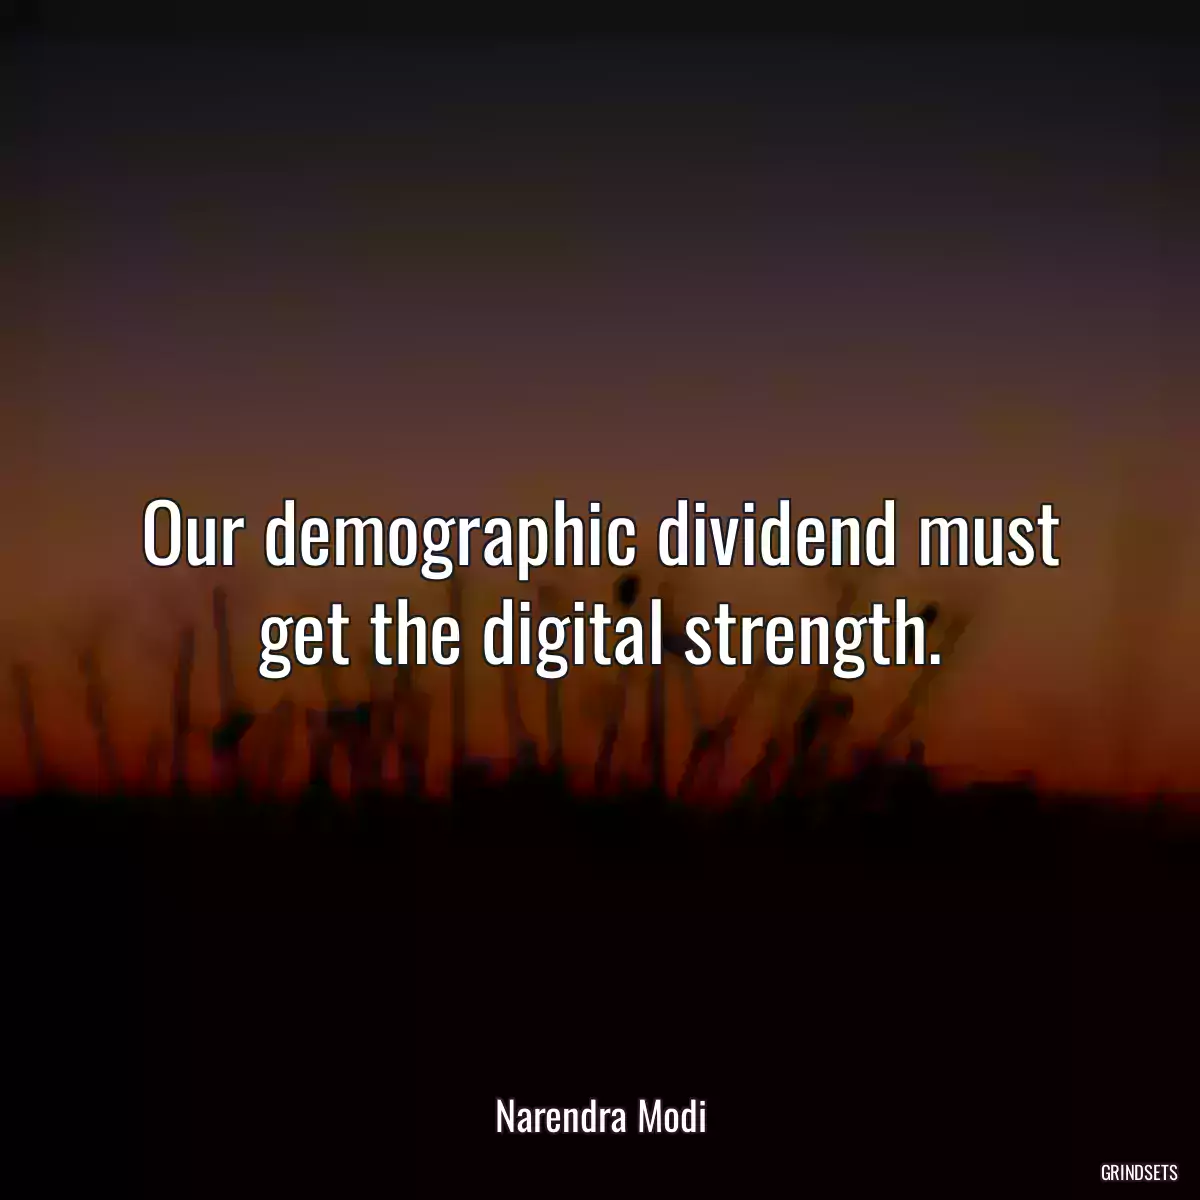 Our demographic dividend must get the digital strength.